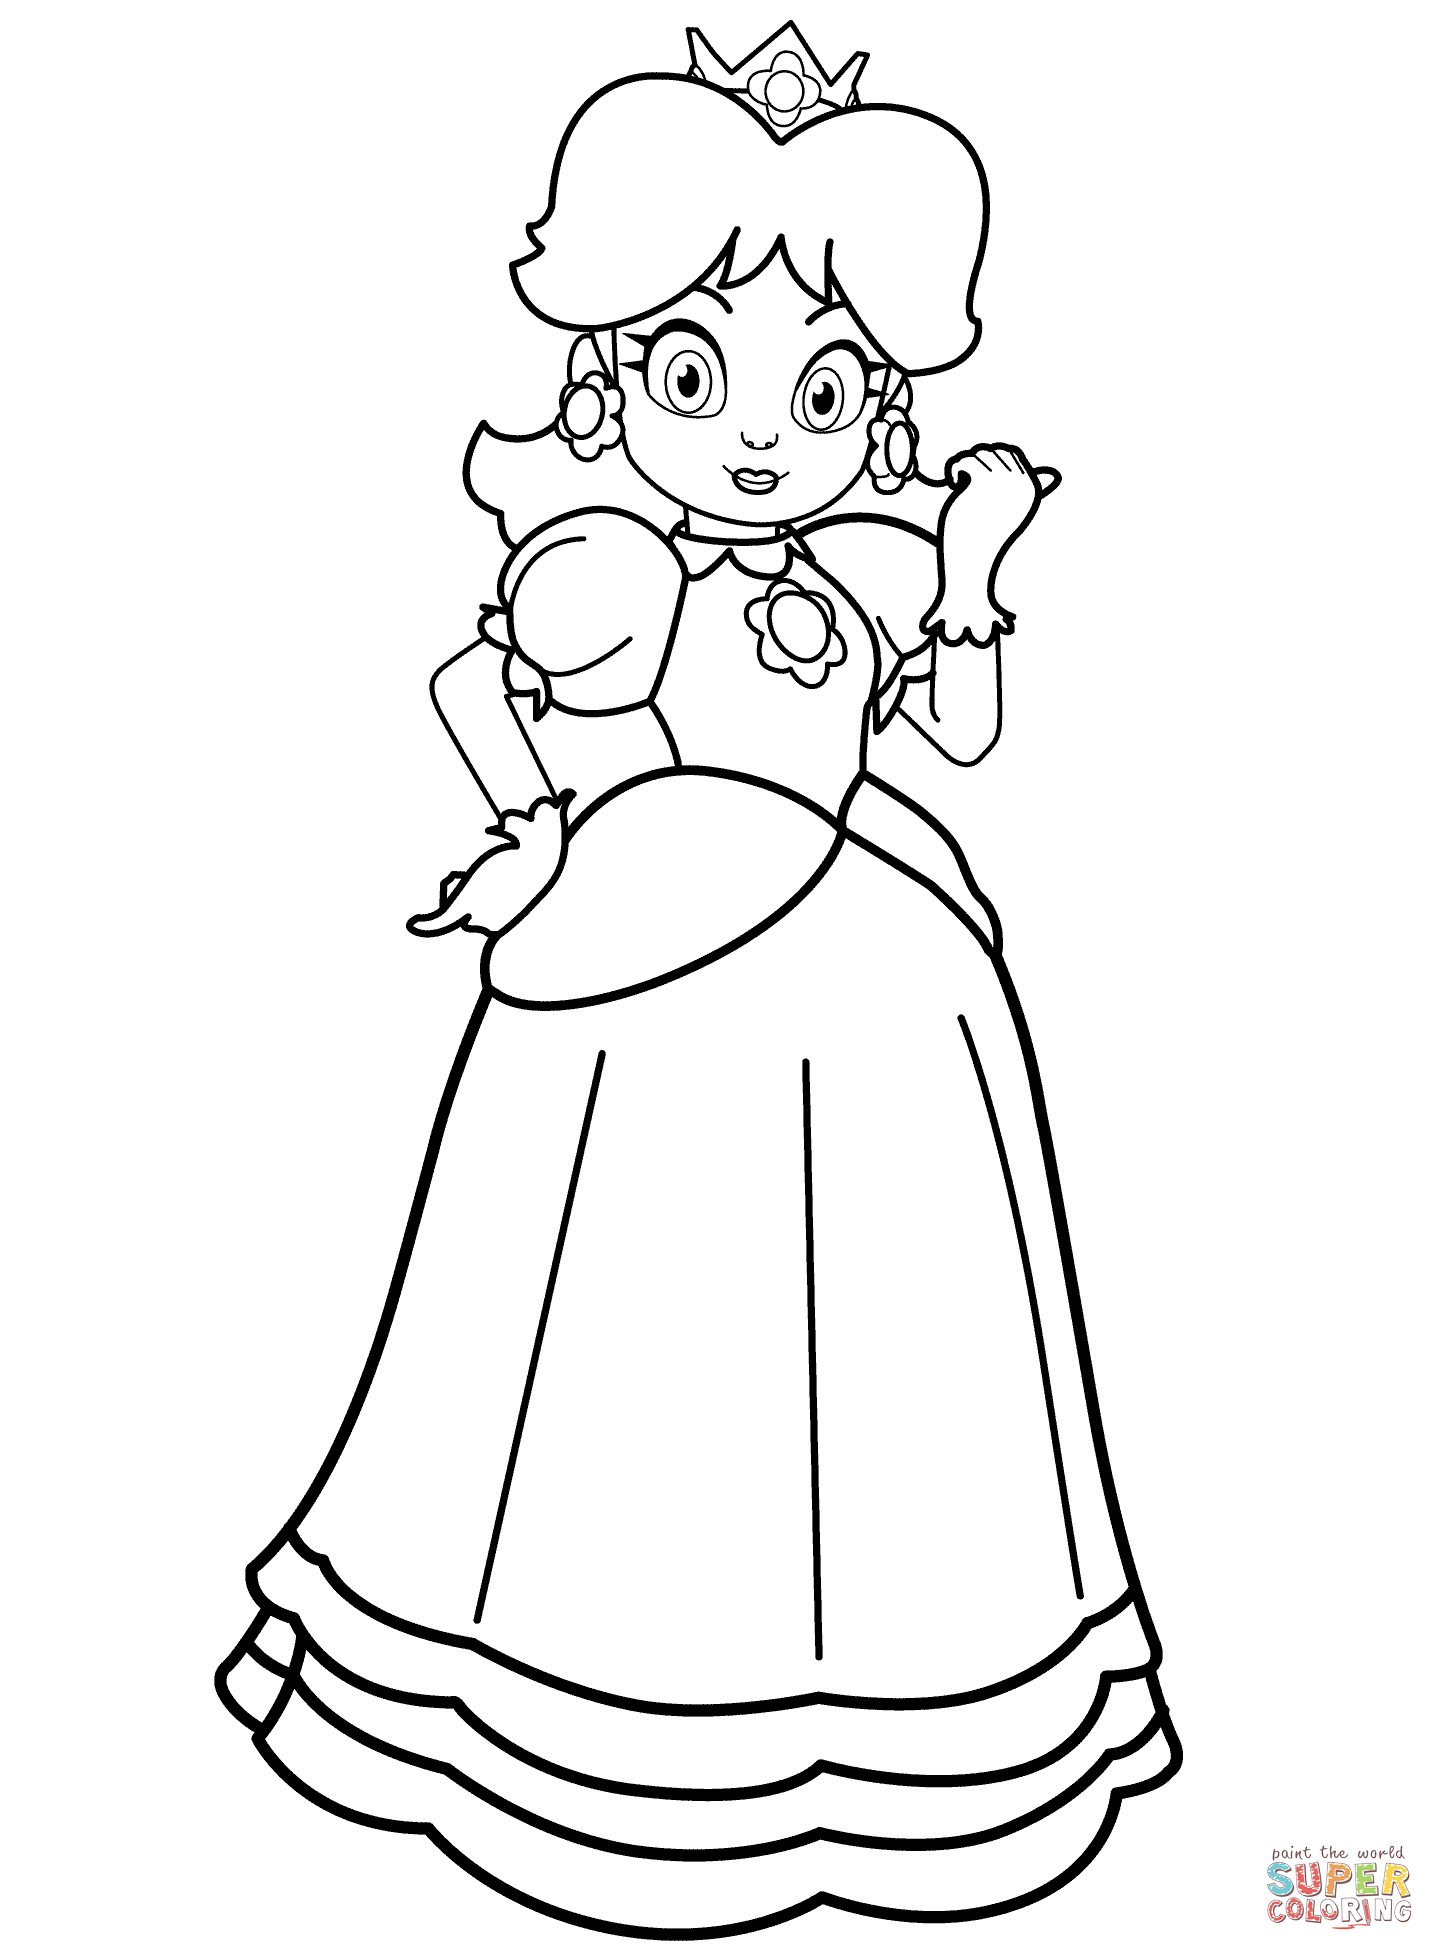 Princess daisy coloring page free printable coloring pages